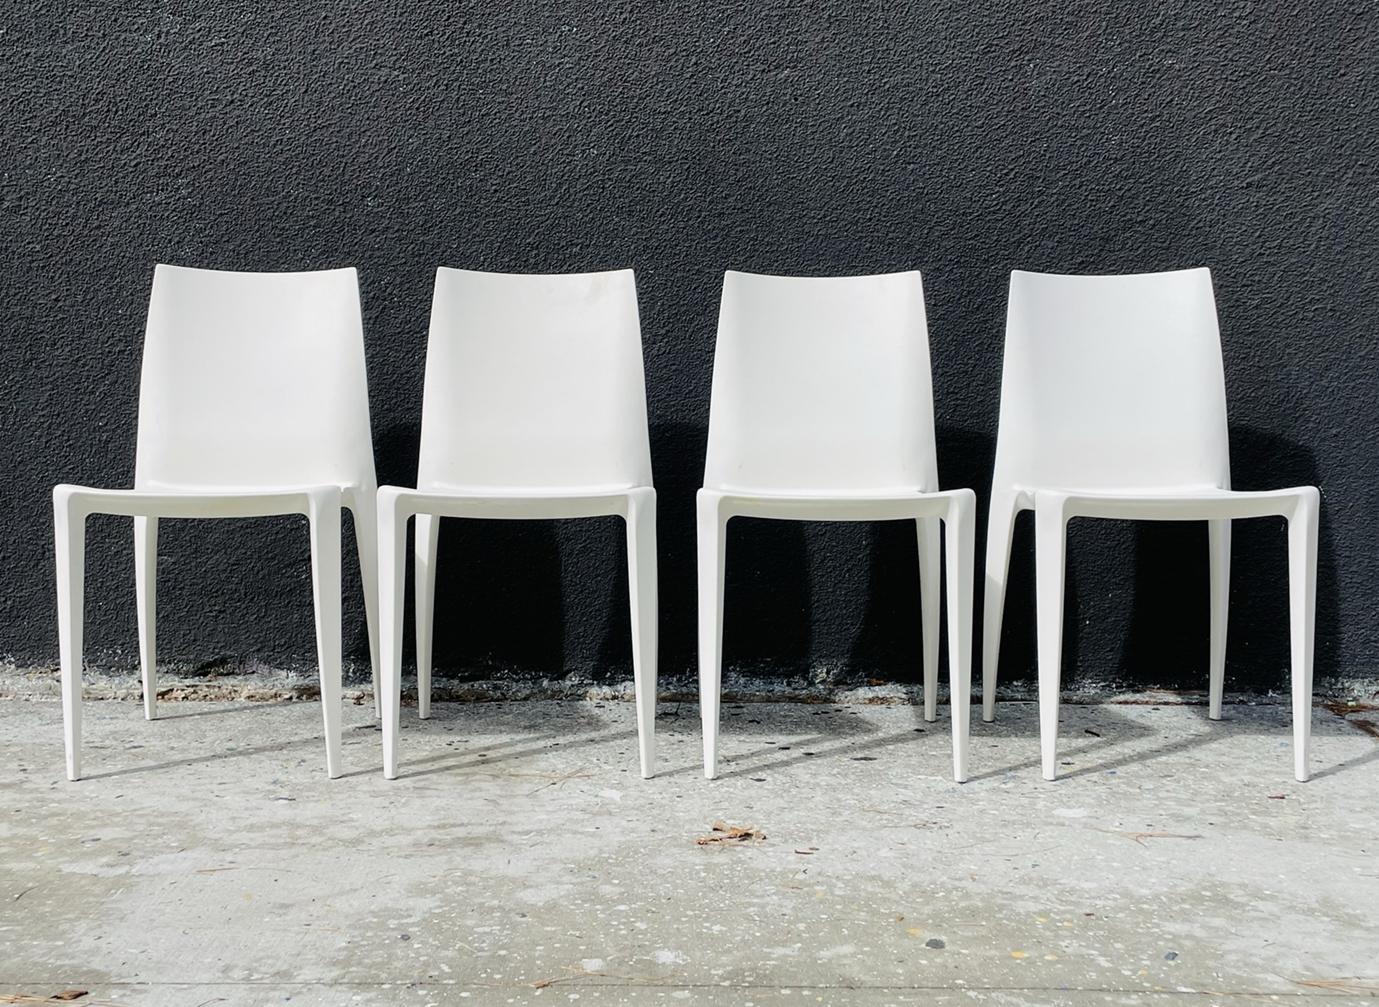 Set of 4 armless chairs designed in Italy by Mario Bellini and manufactured in the USA by Heller.

This chair design earned celebrated Italian architect and designer Mario Bellini his eighth Compasso d'Oro award in 2001. Bellini resides in the